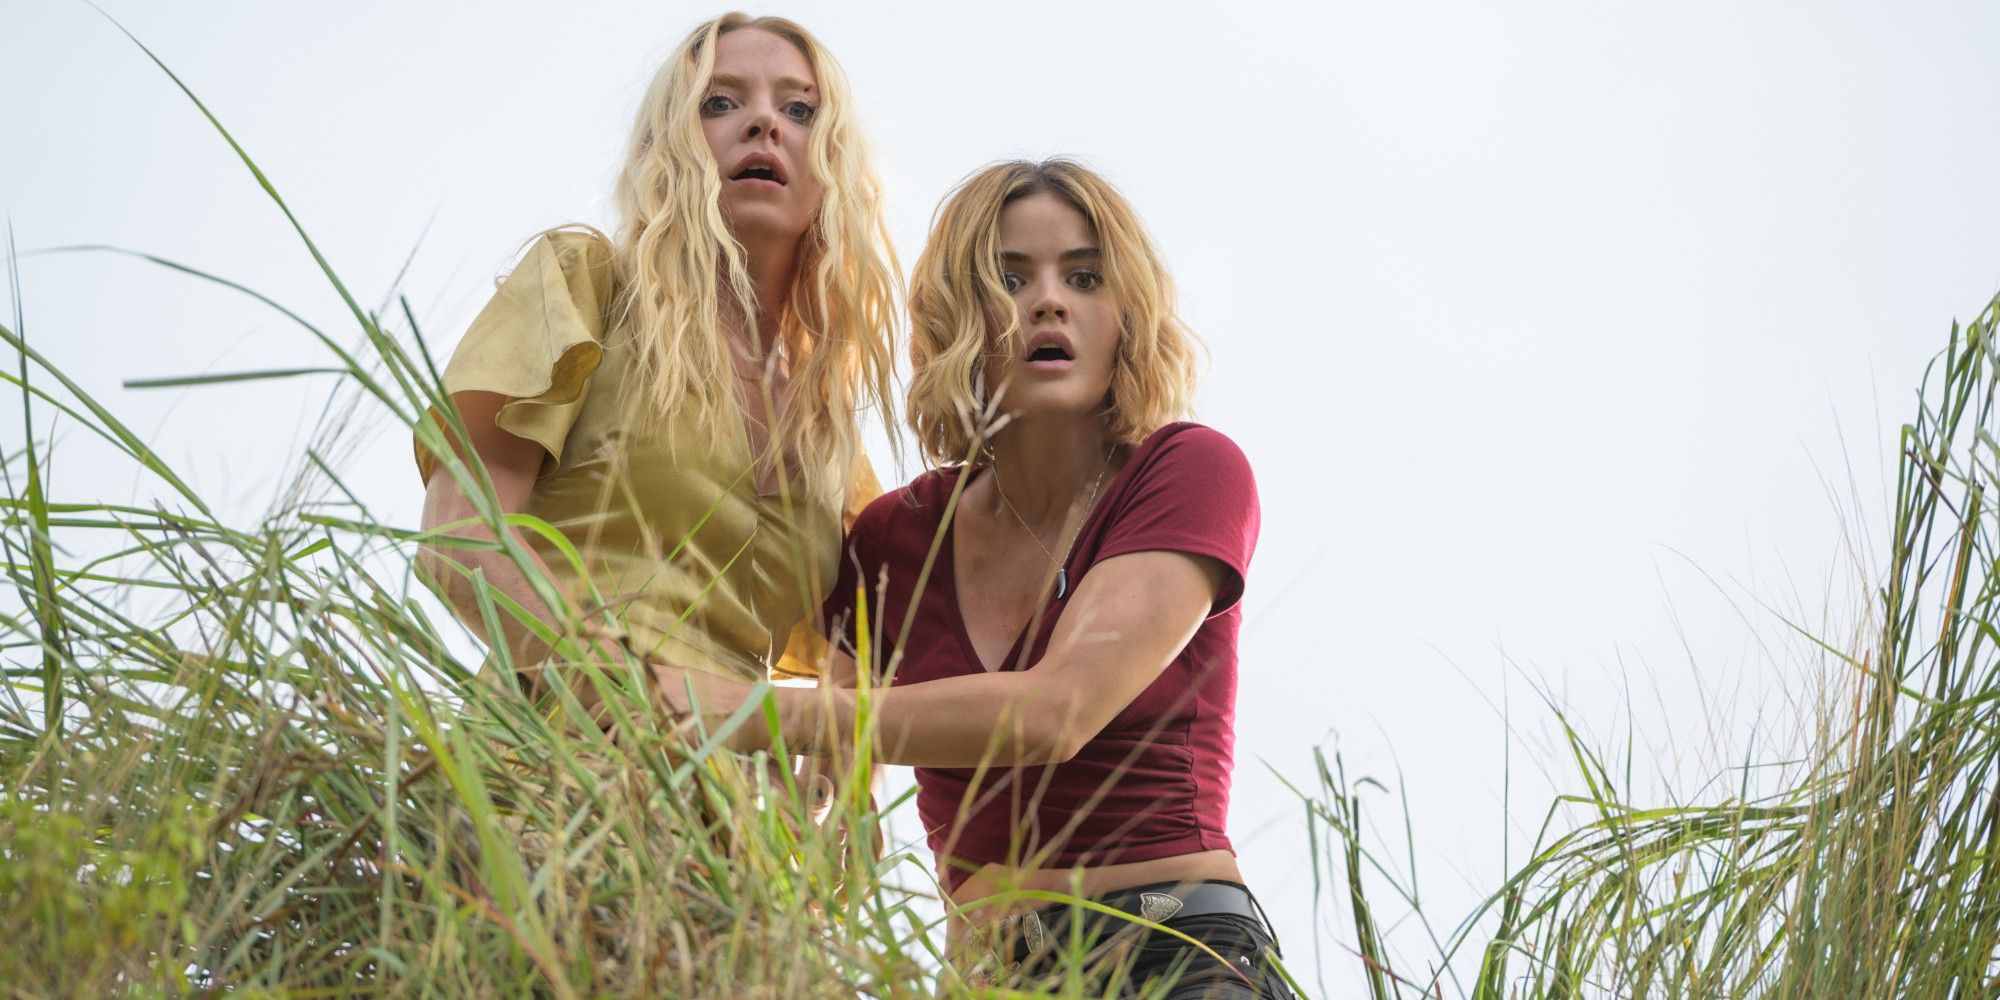 Portia Doubleday and Lucy Hale making a shocking discovery on the beach in in Fantasy Island.